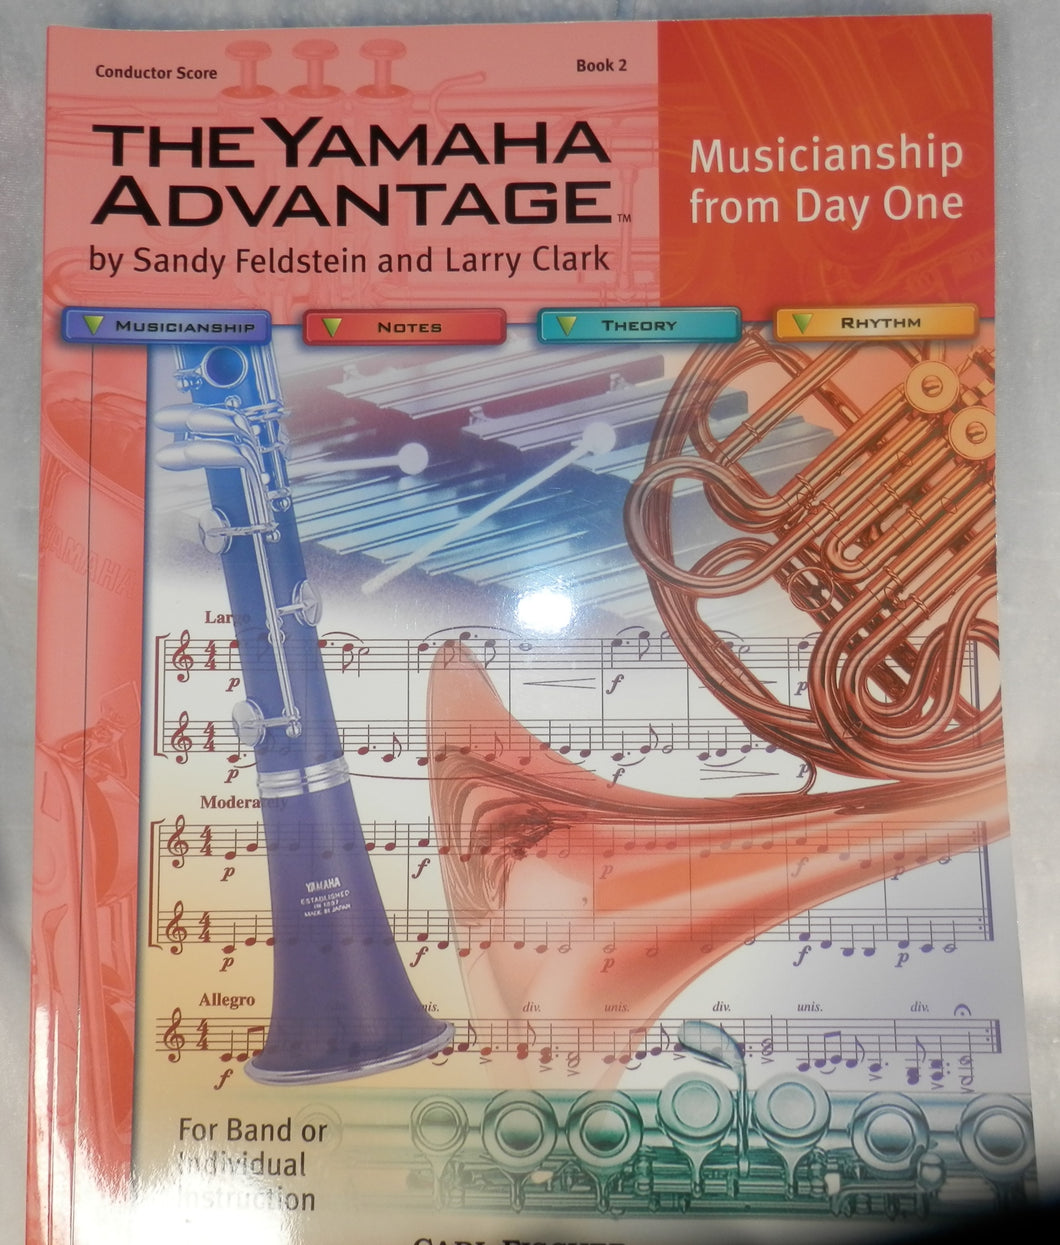 Yamaha Advantage Musicianship from Day One for Band or Individual Instruction Book 2 Conductor Score